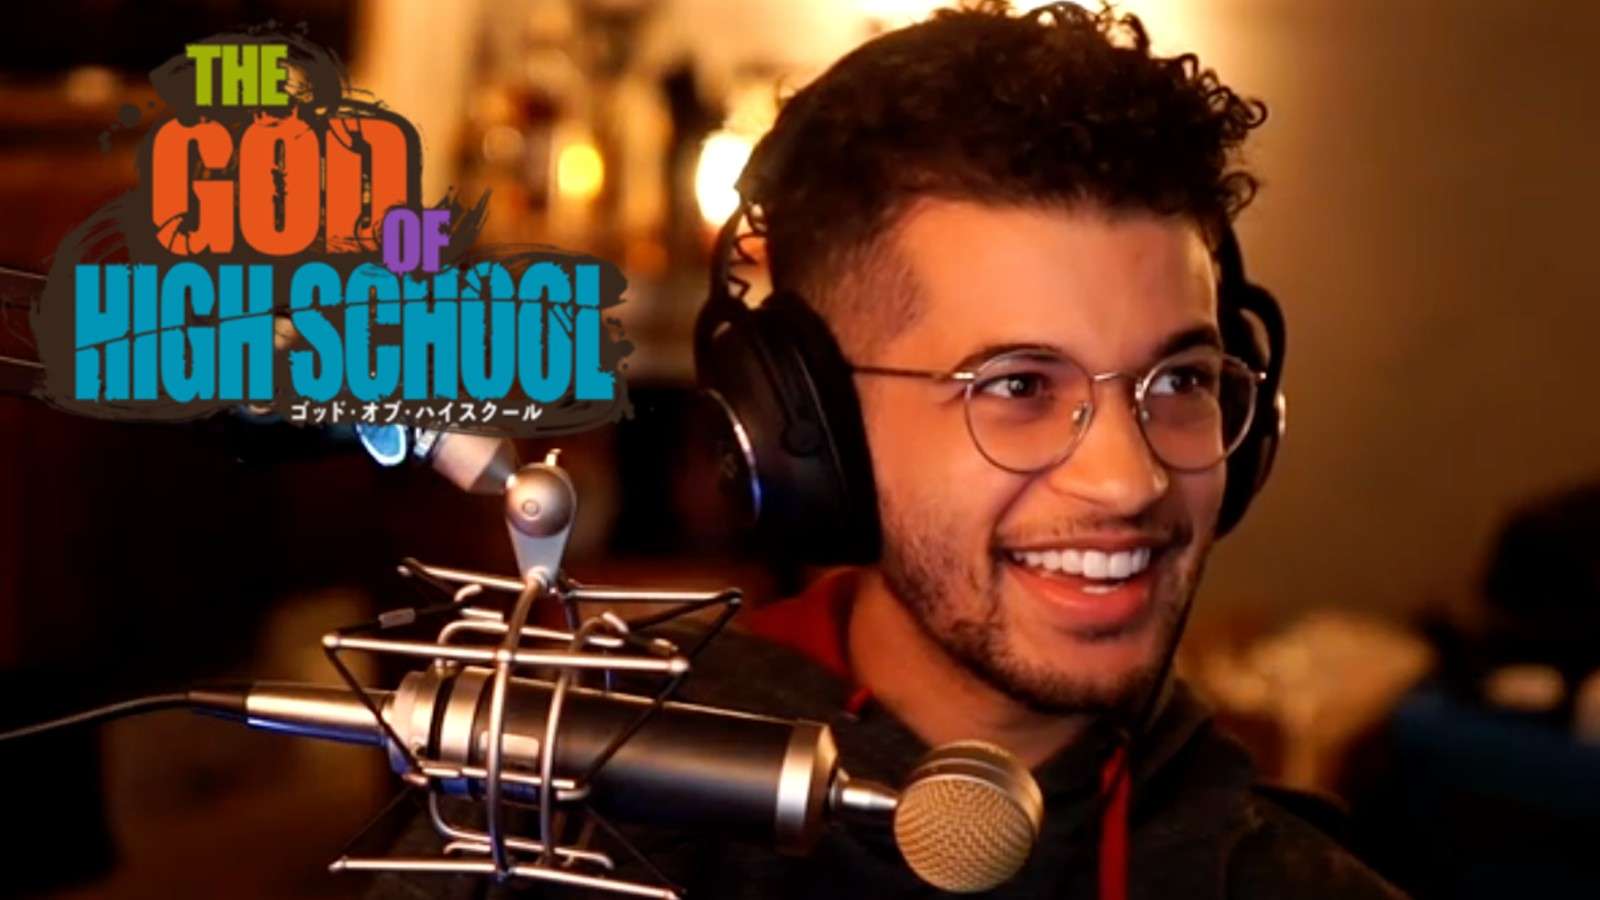 Jordan Fisher while streaming next to the God of High School logo